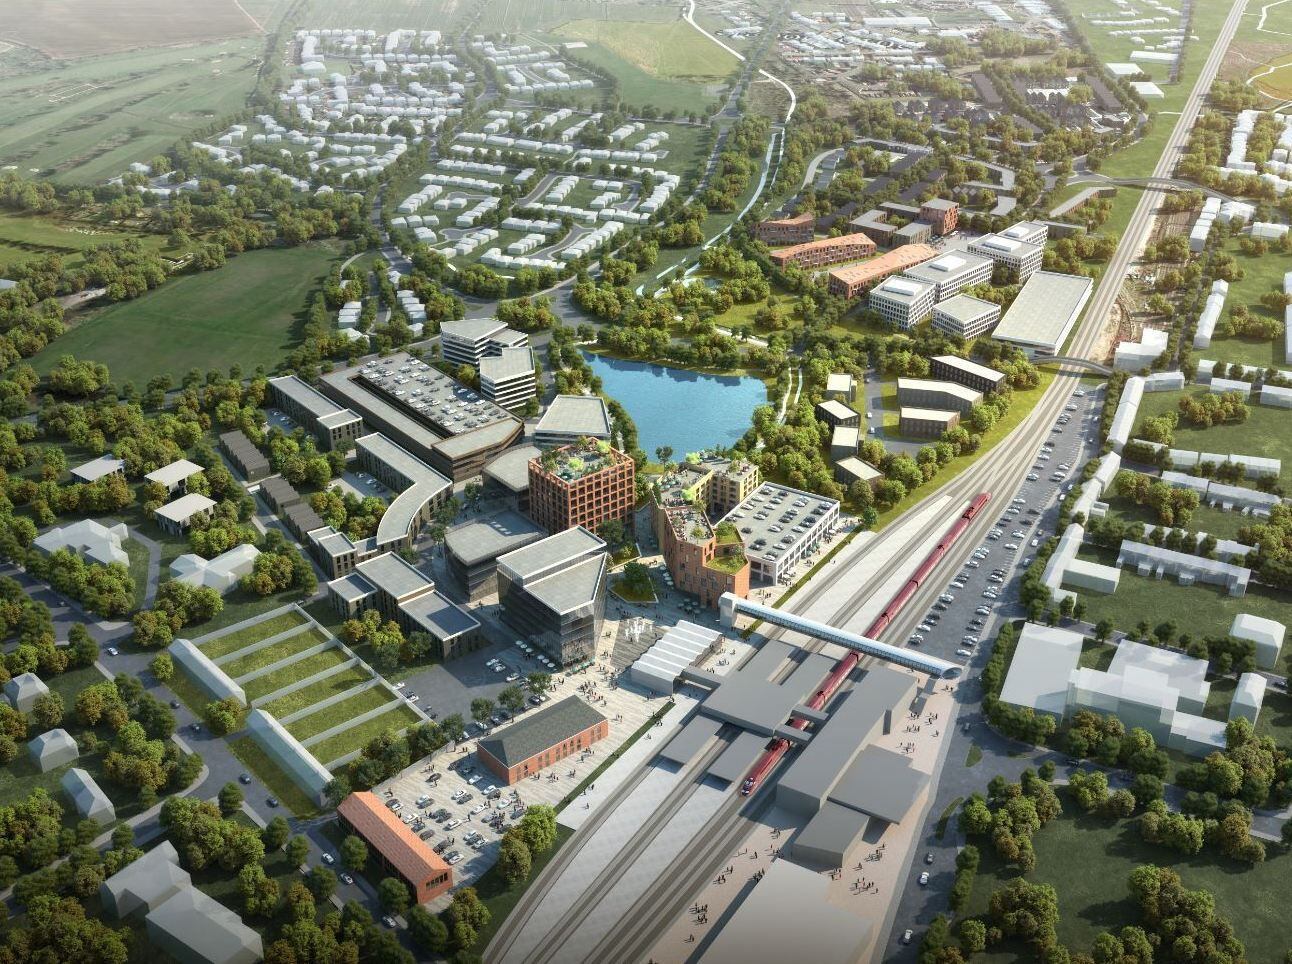 Ambitious 'garden community' plans for Stafford will not be affected by scrapping of HS2 line